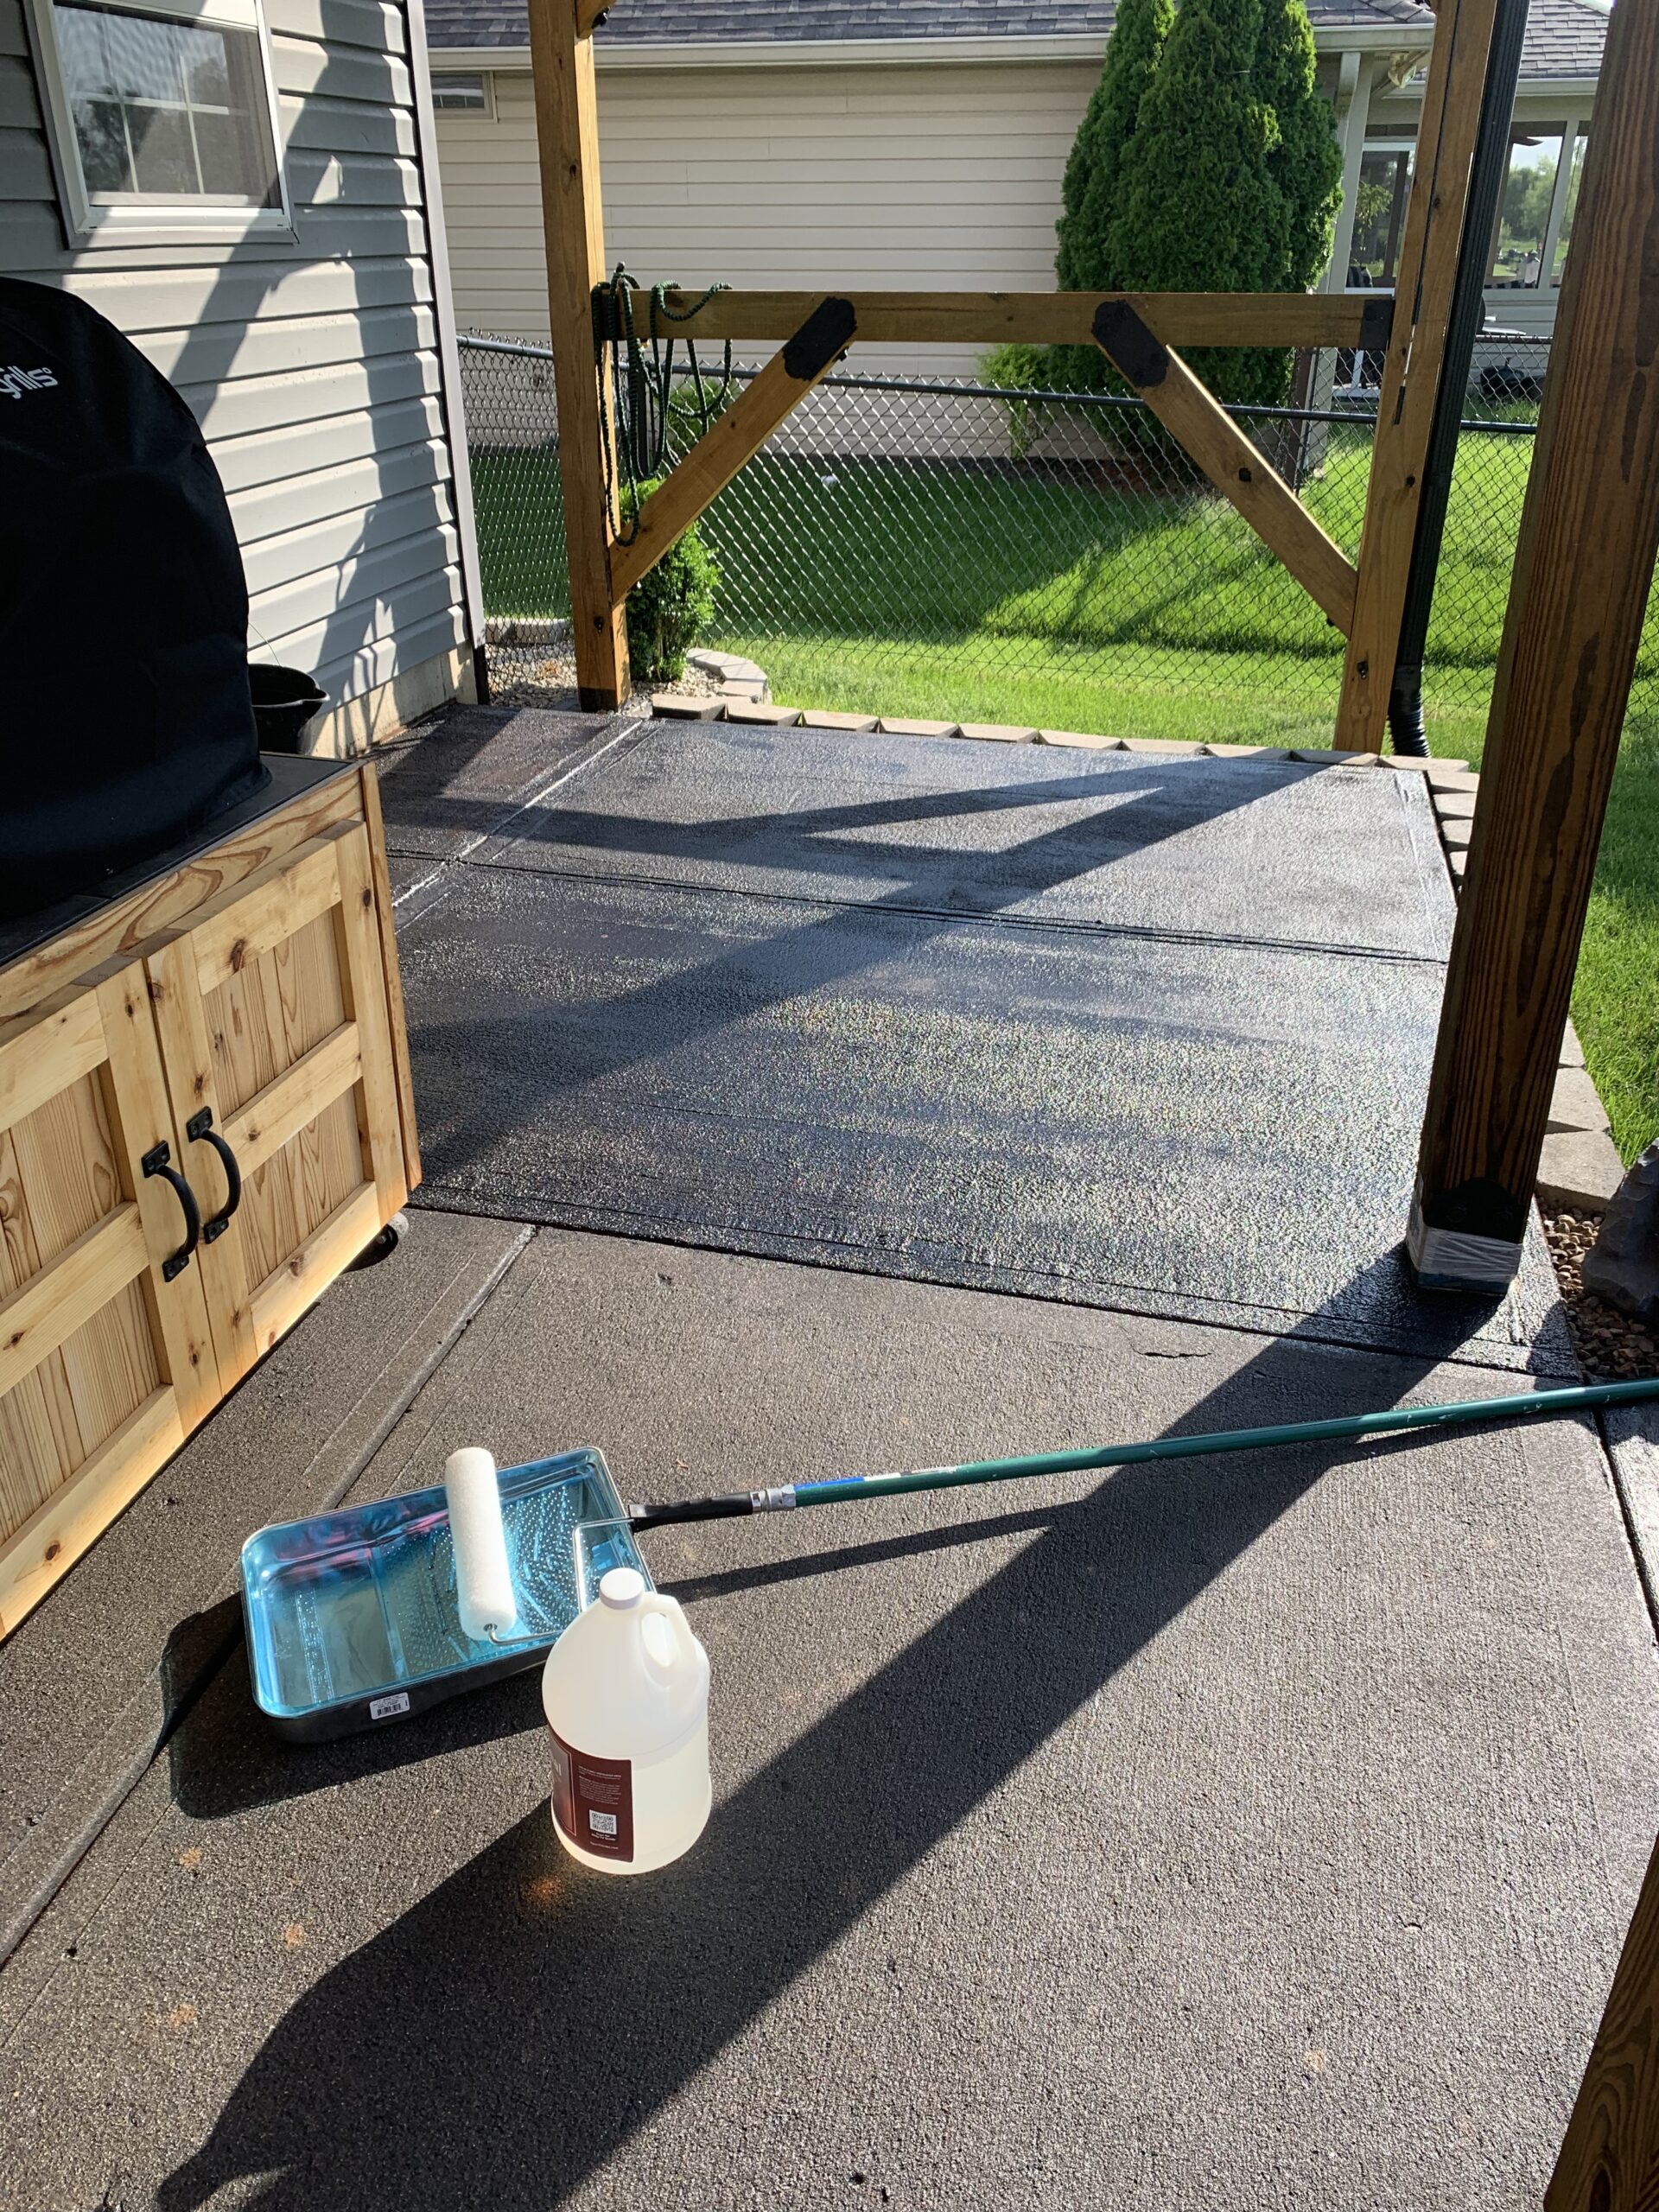 Patio after the second coat application of EasySeal satin sealer with a roller